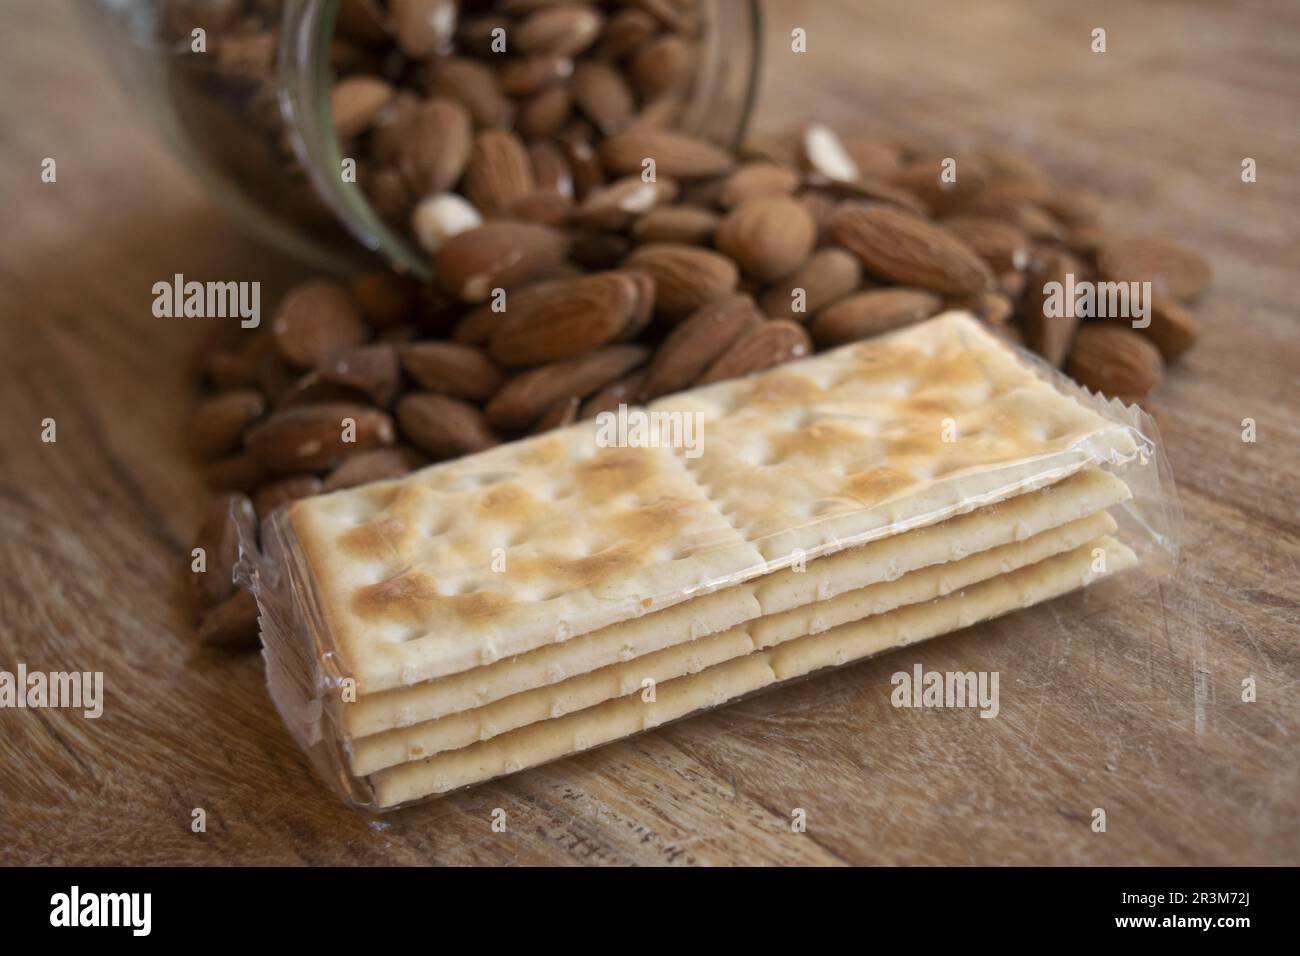 crackers and almonds for a diet of healthy carbohydrates and fats Stock Photo